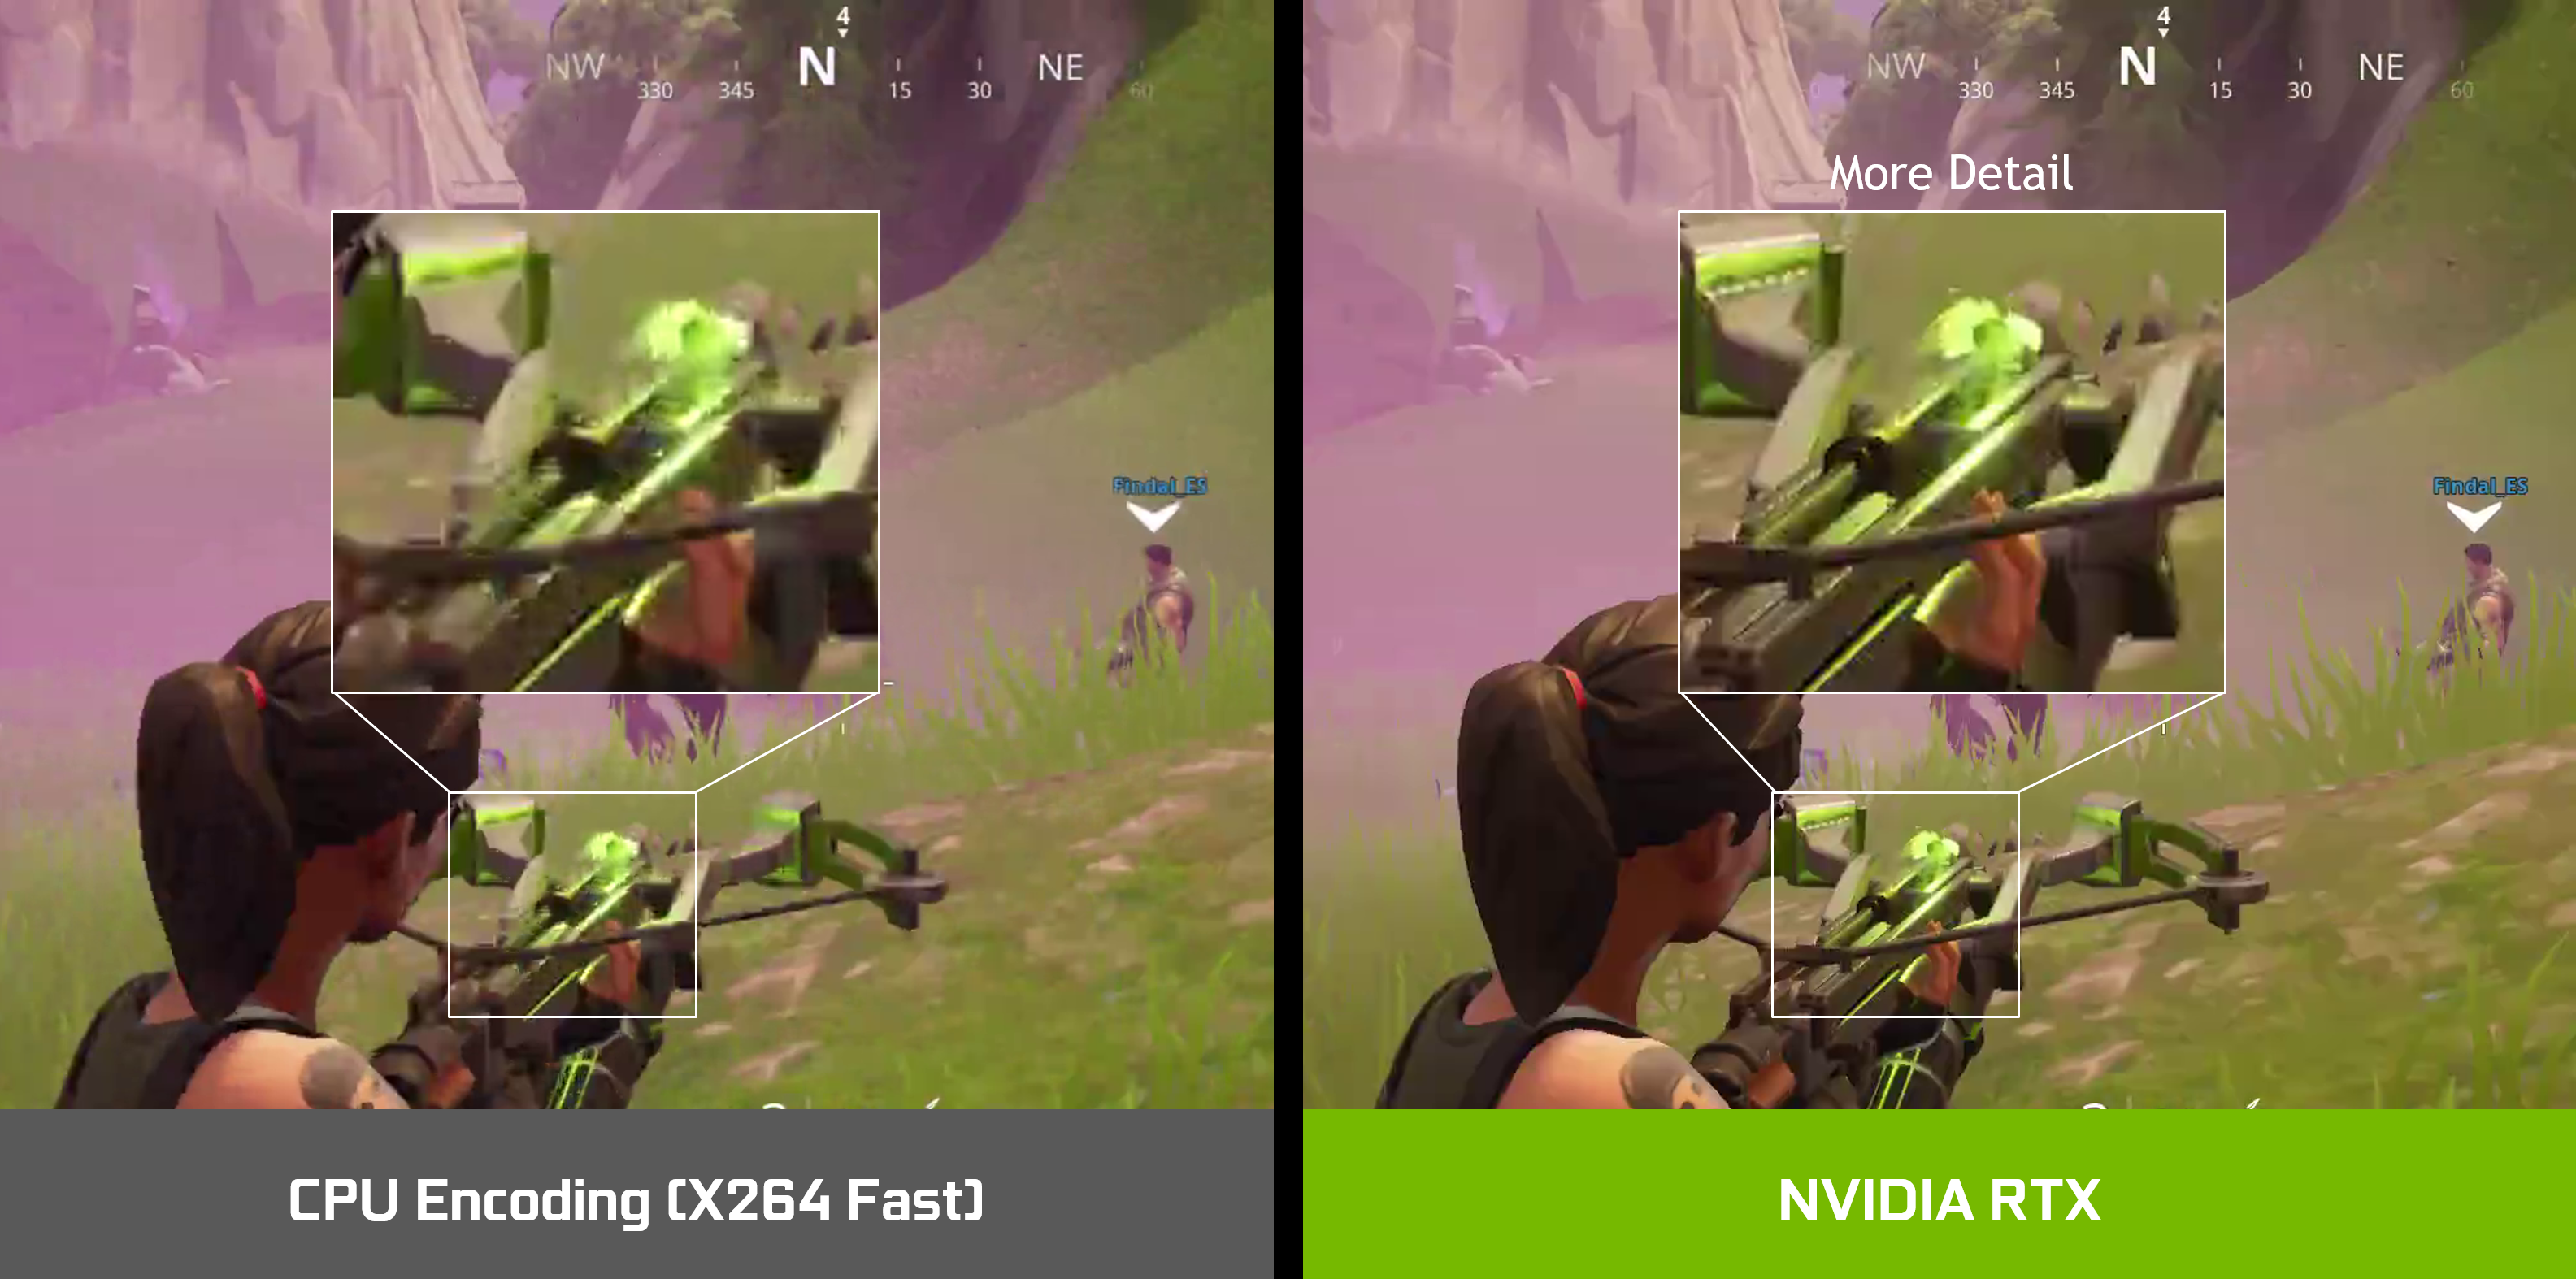 Available New GeForce-Optimized OBS and RTX Encoder Pro-Quality Broadcasting on a Single PC | GeForce | NVIDIA